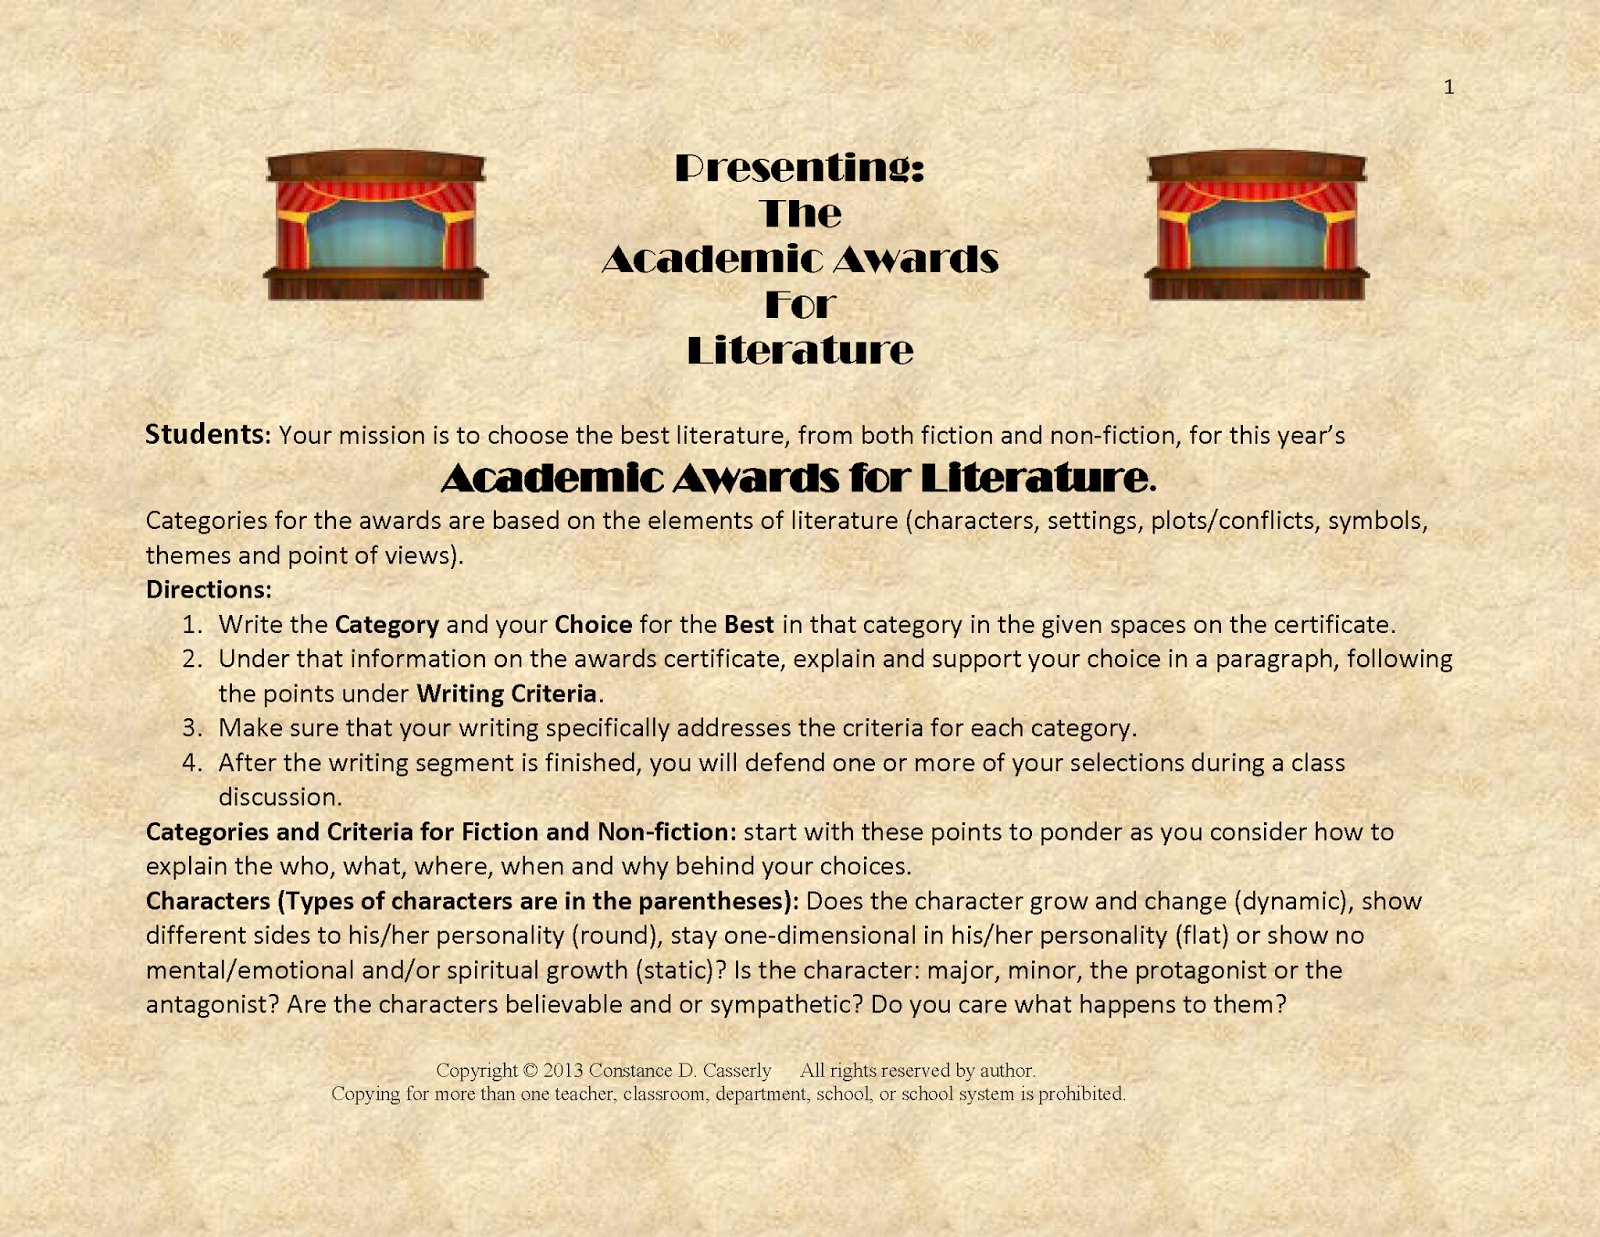 Academic Awards for Literature Student Directions